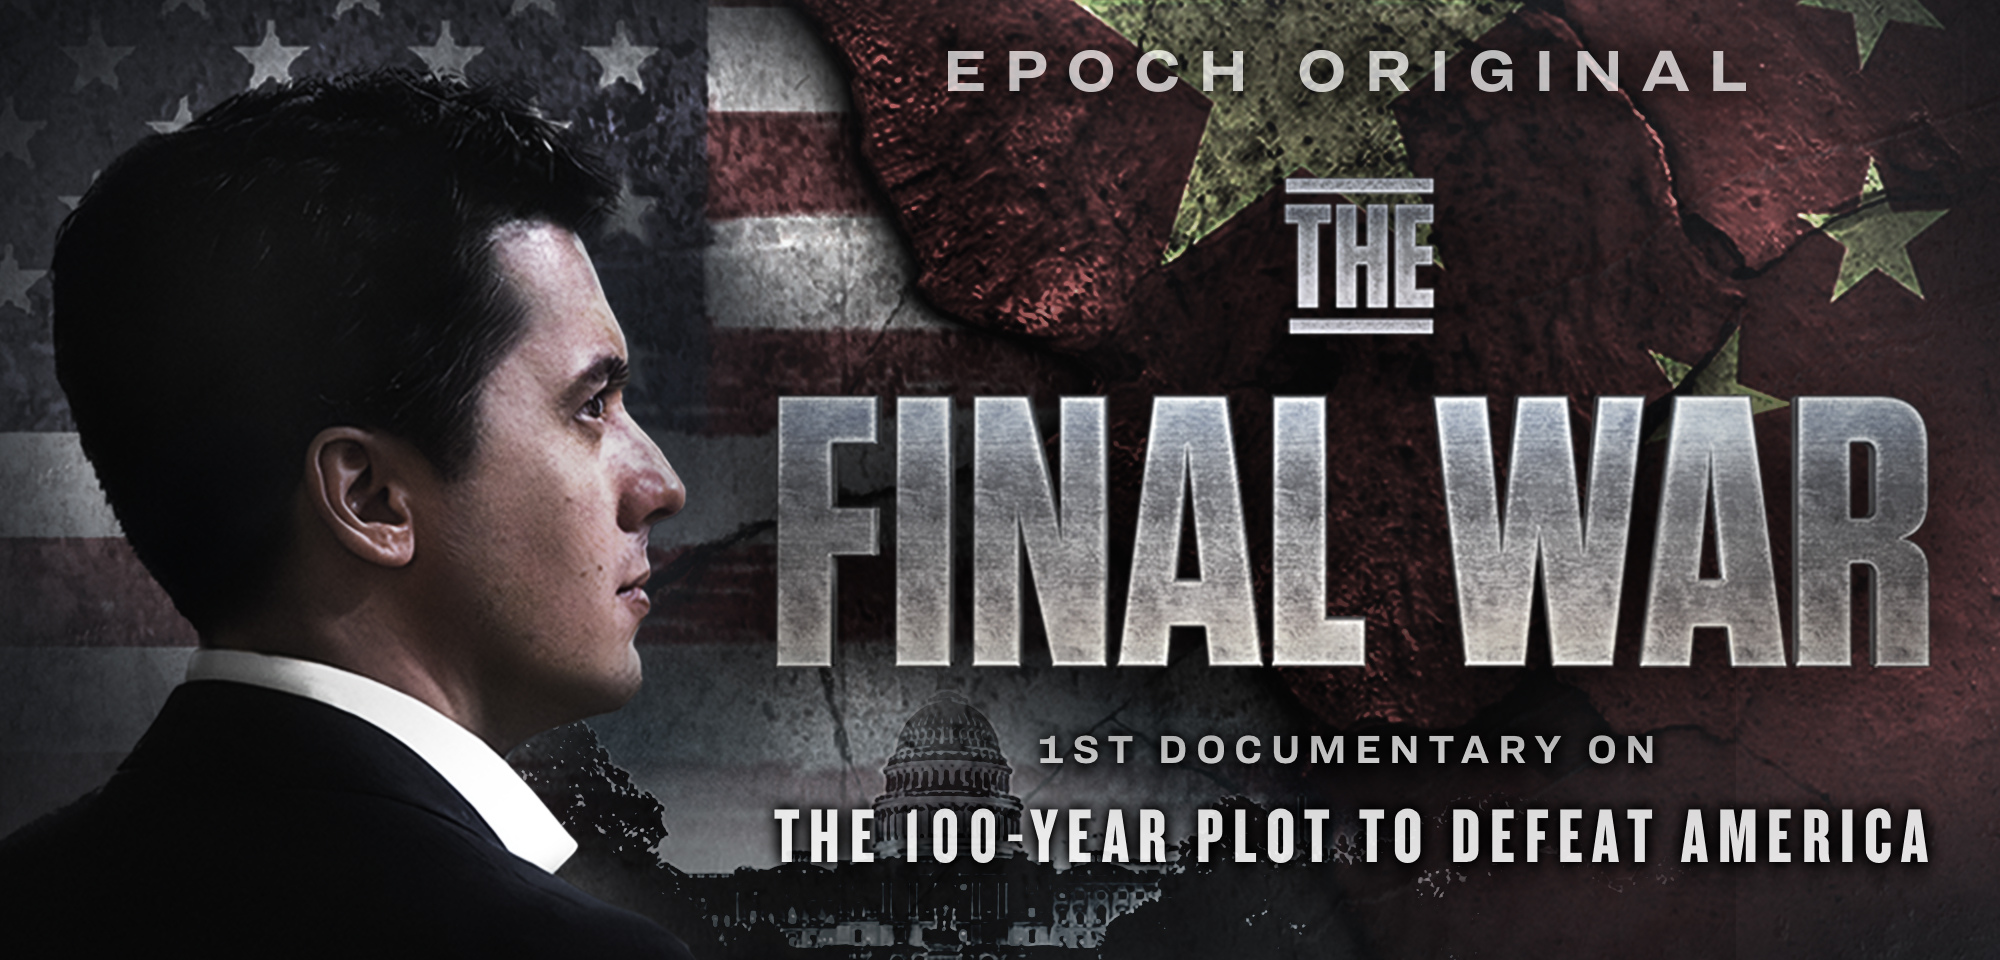 EXCLUSIVE DOCUMENTARY—The Final War: The 100-Year Plot to Defeat America